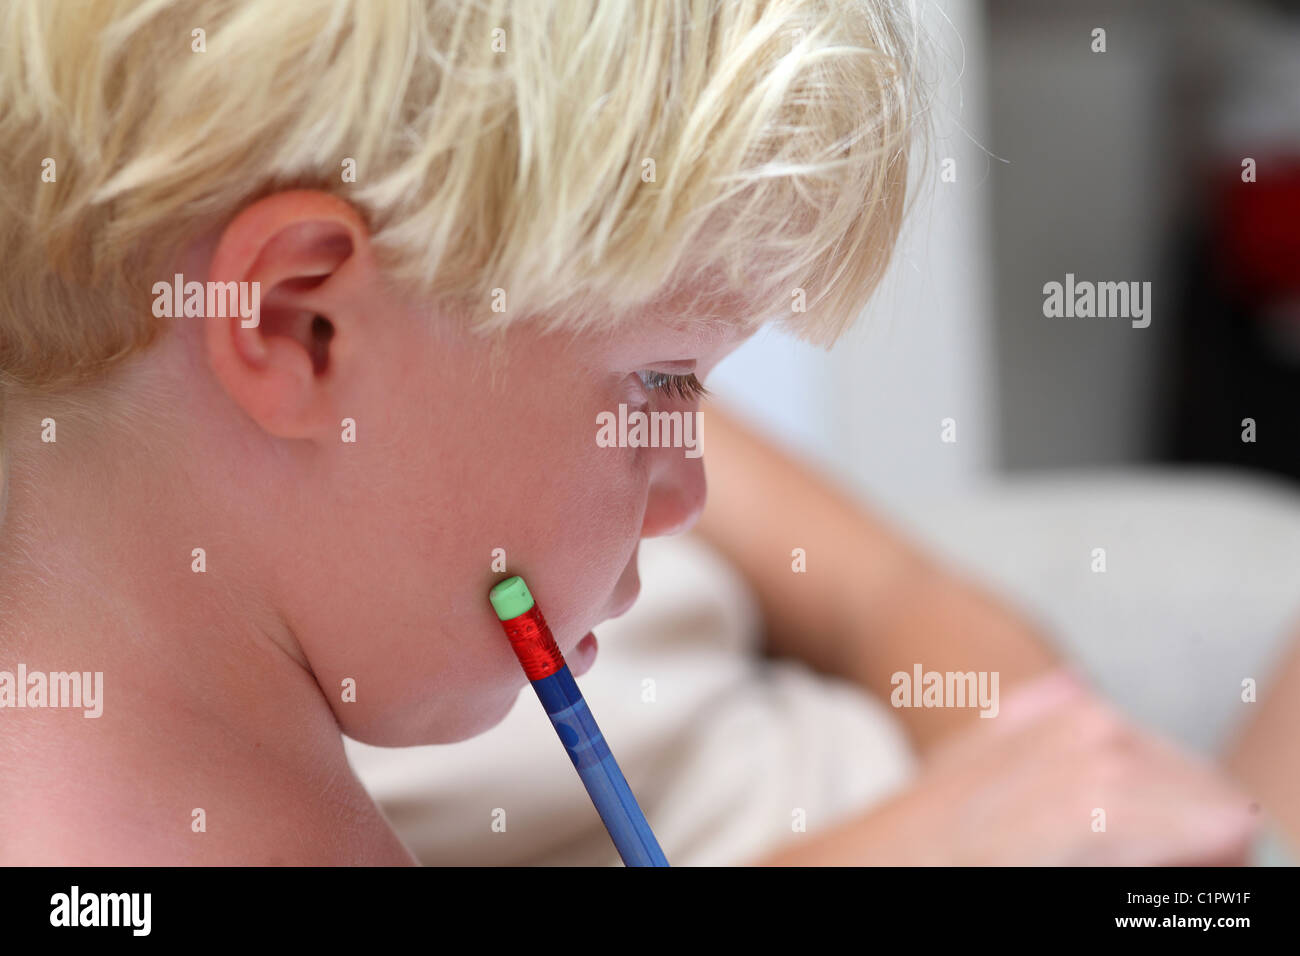 A young toddler or boy with light blonde hair concentrates on his homework with a blue pencil Stock Photo